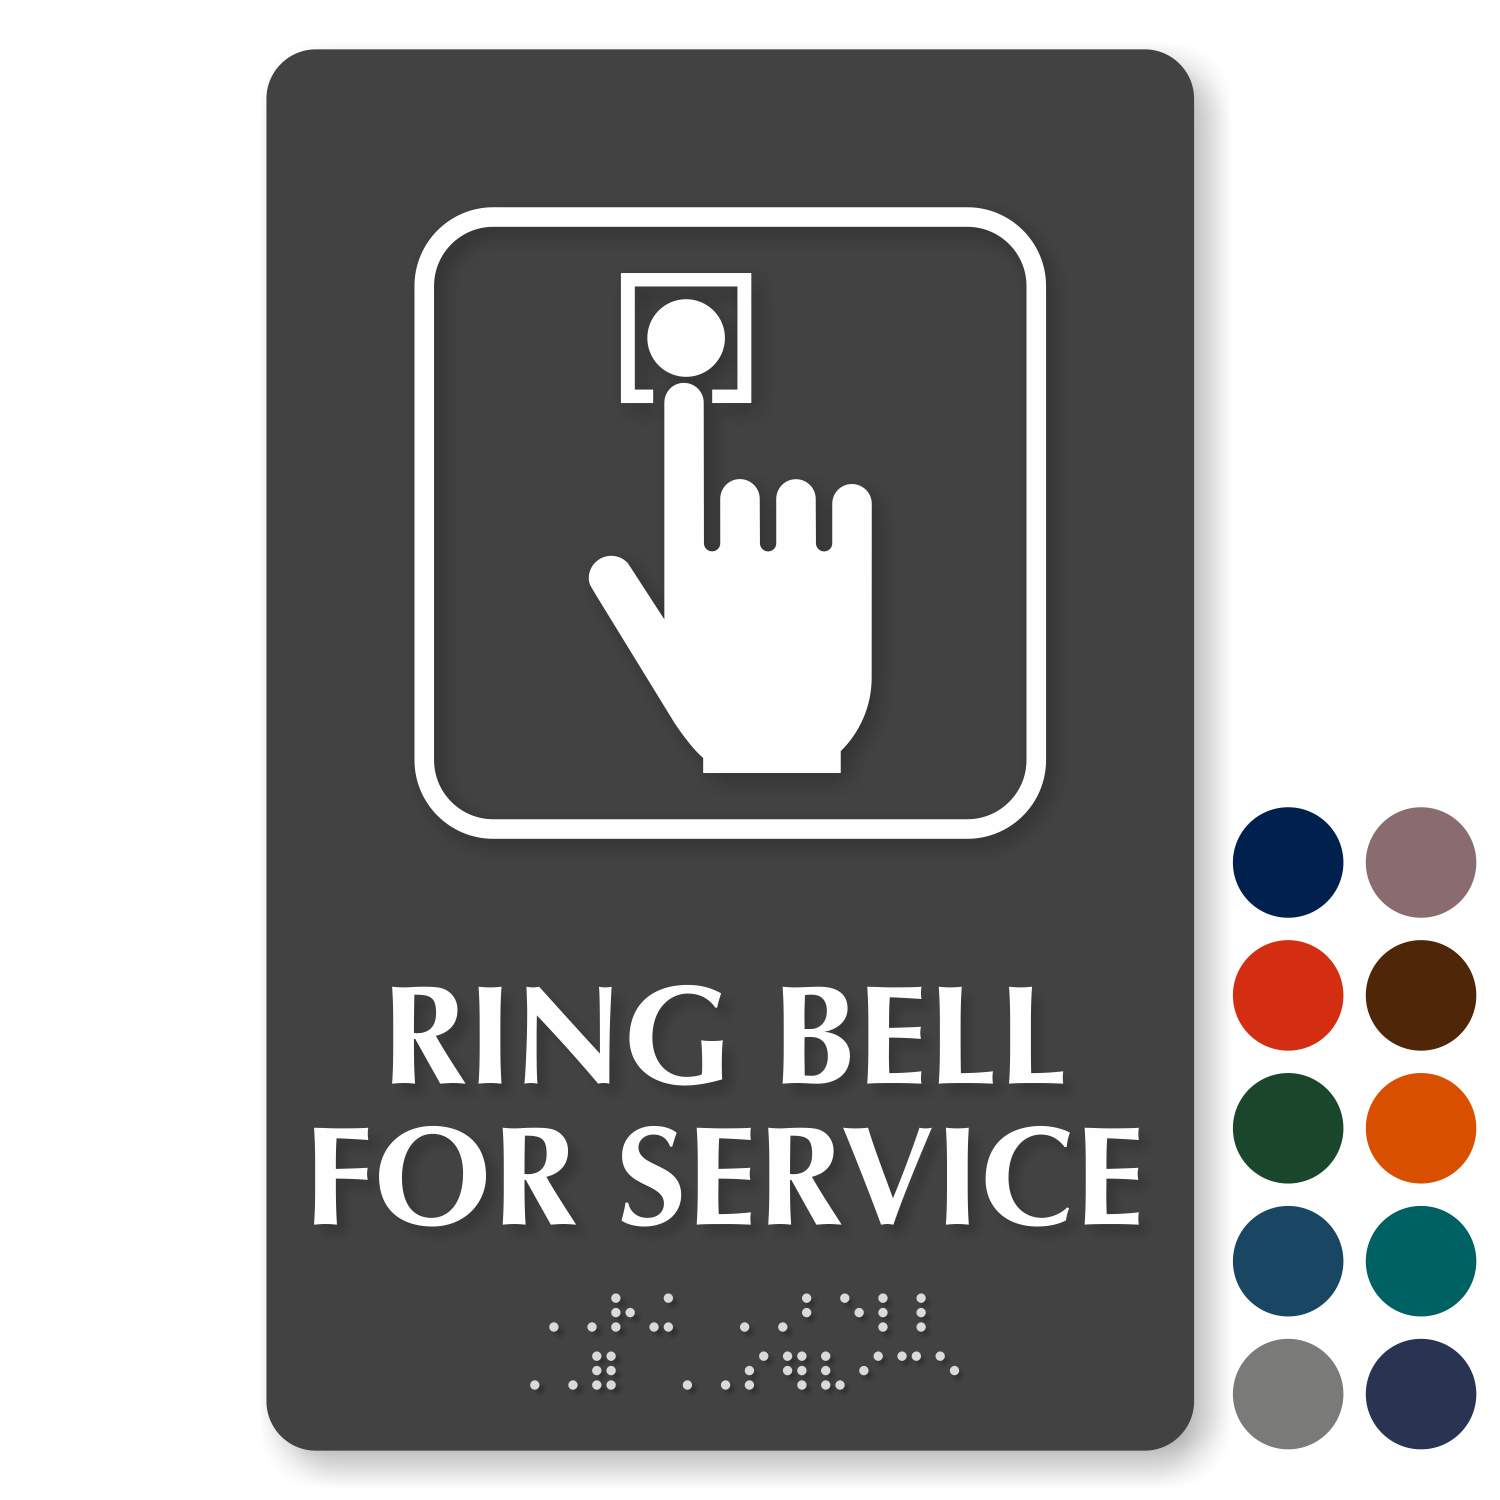 Ring bell sign